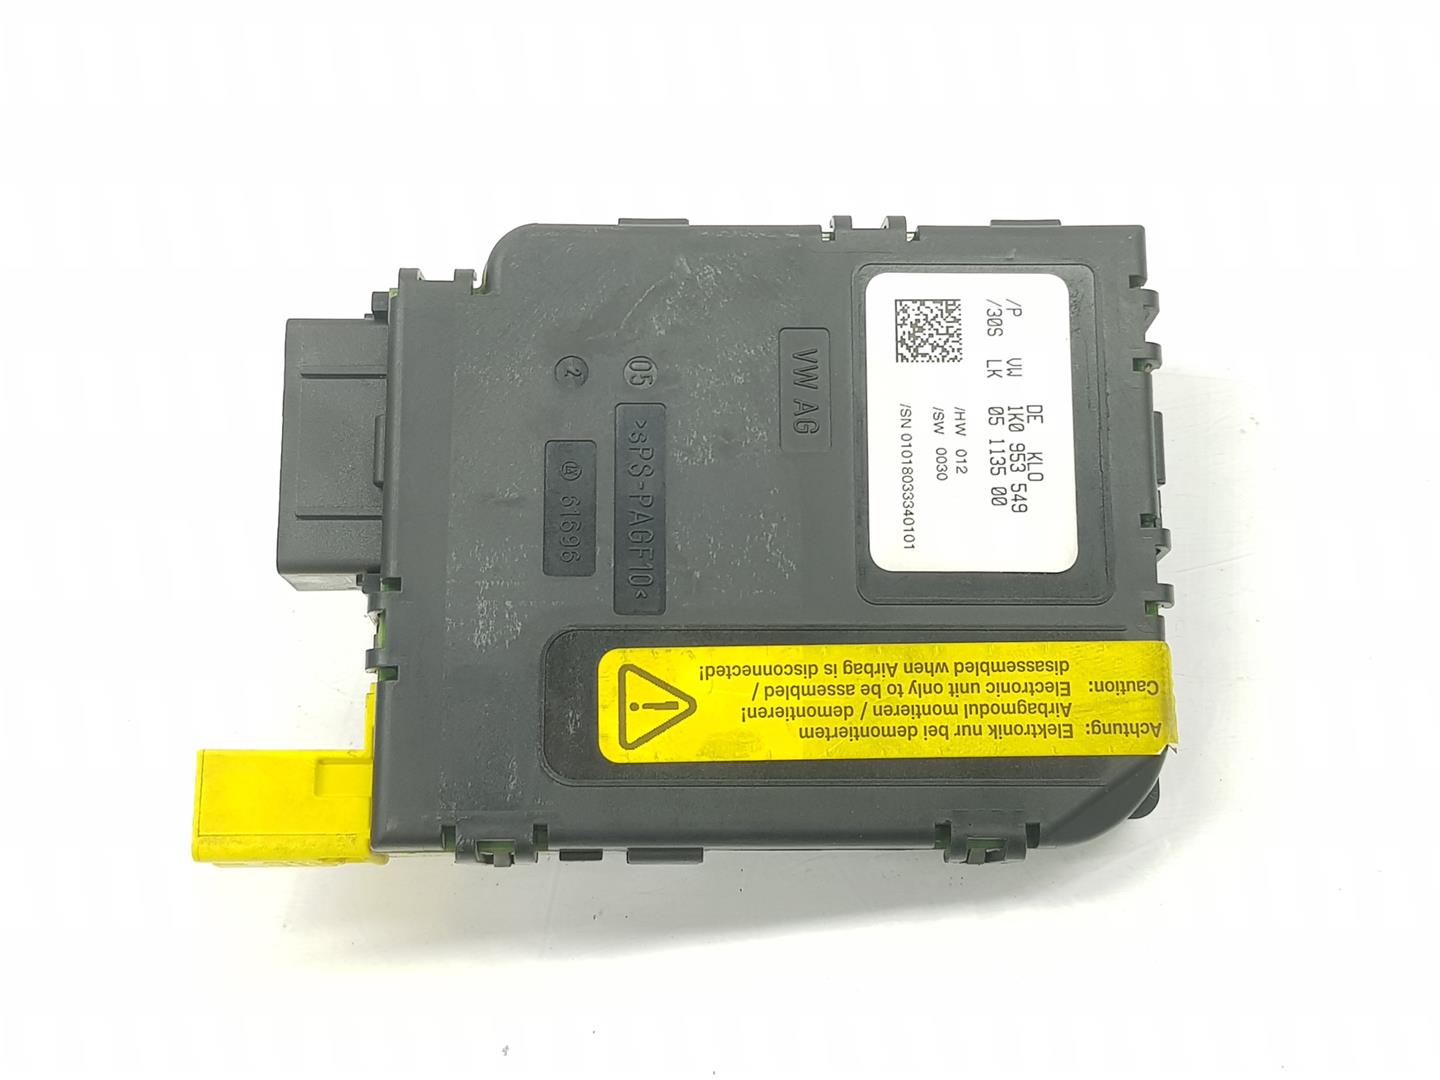 VOLKSWAGEN Caddy 3 generation (2004-2015) Other Control Units 1K0953549, 1K0953549 21078394